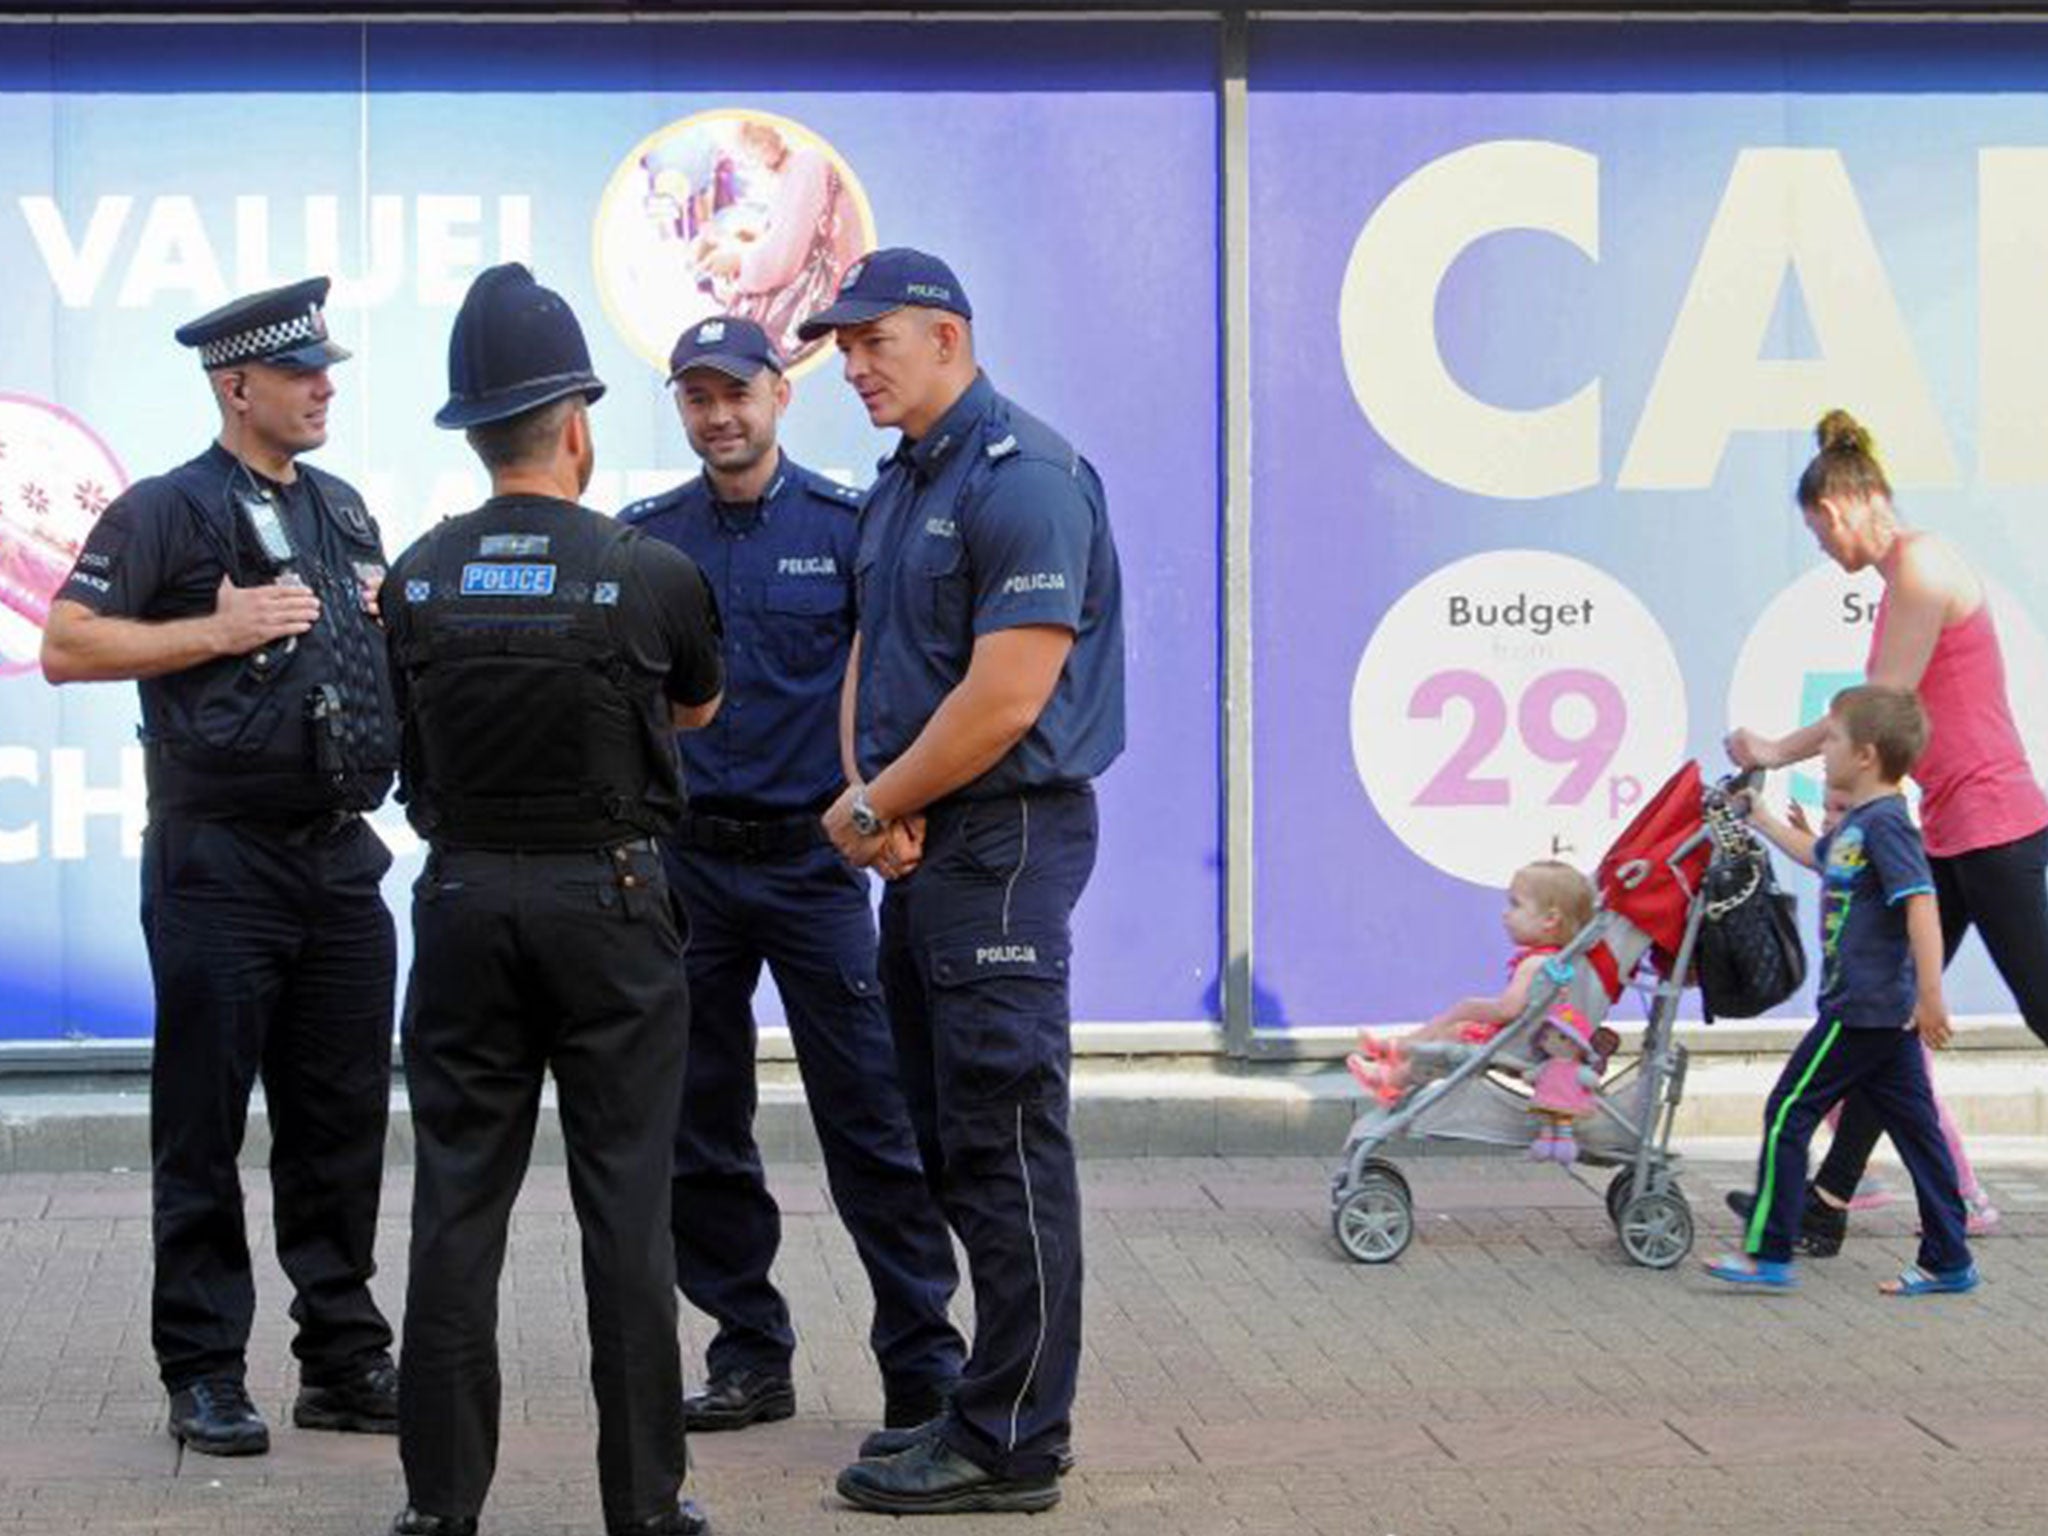 Chief Sergeant Dariusz Tybura (right) and Second Lieutenant Bartosz Czernicki (second from right), with Essex Police officers on patrol in Harlow